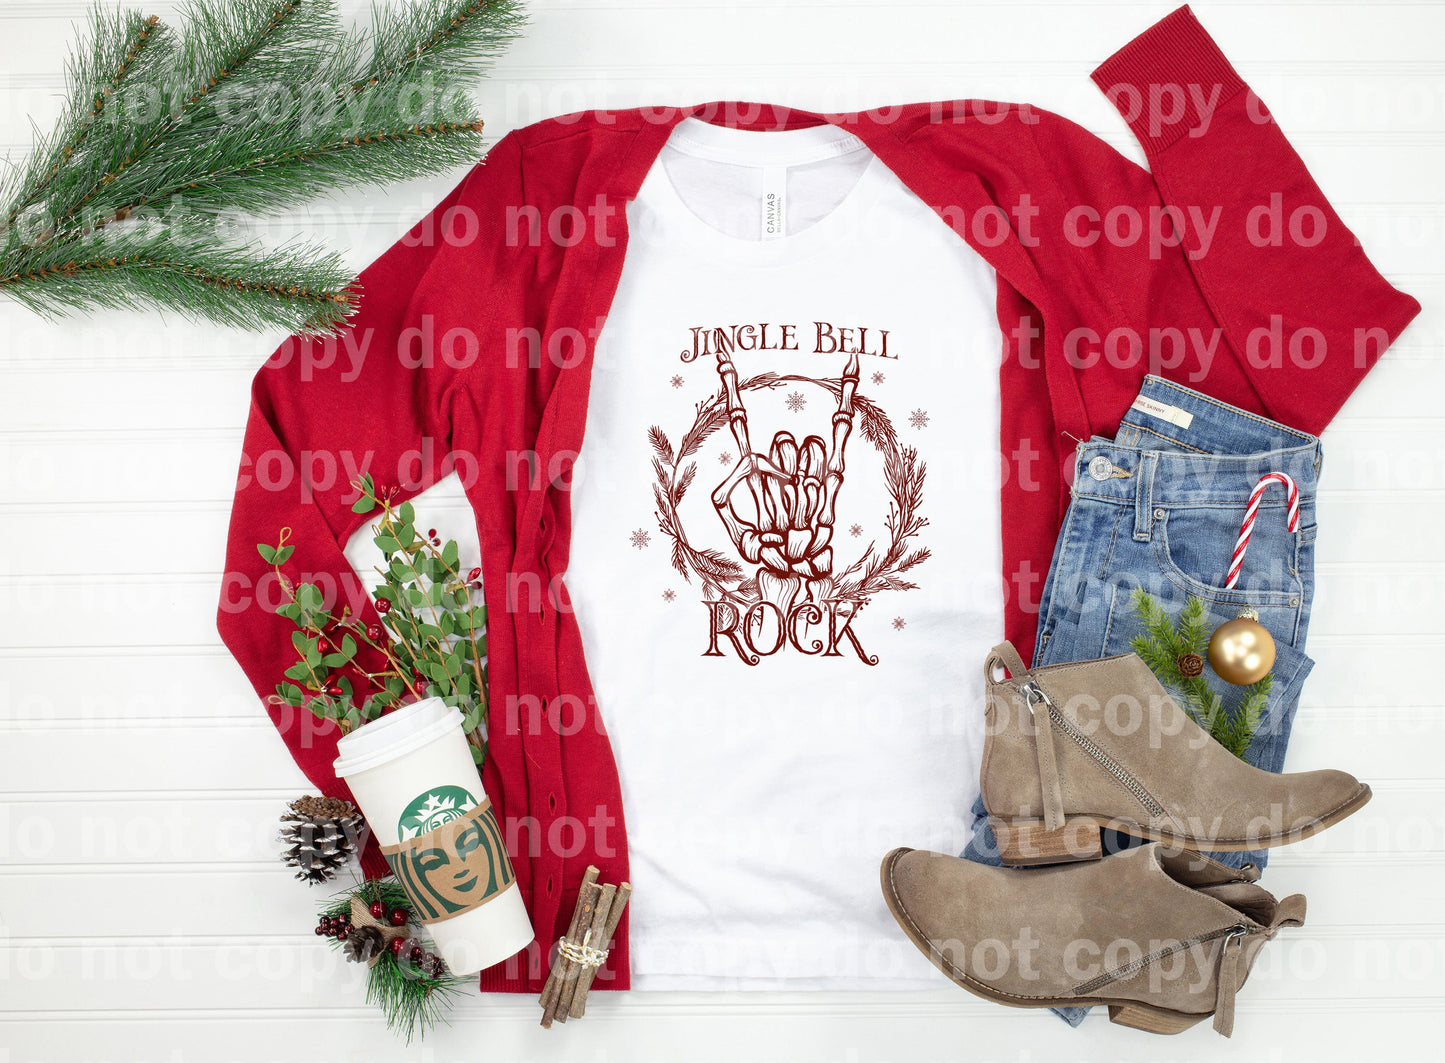 Jingle Bell Rock Dream Print or Sublimation Print